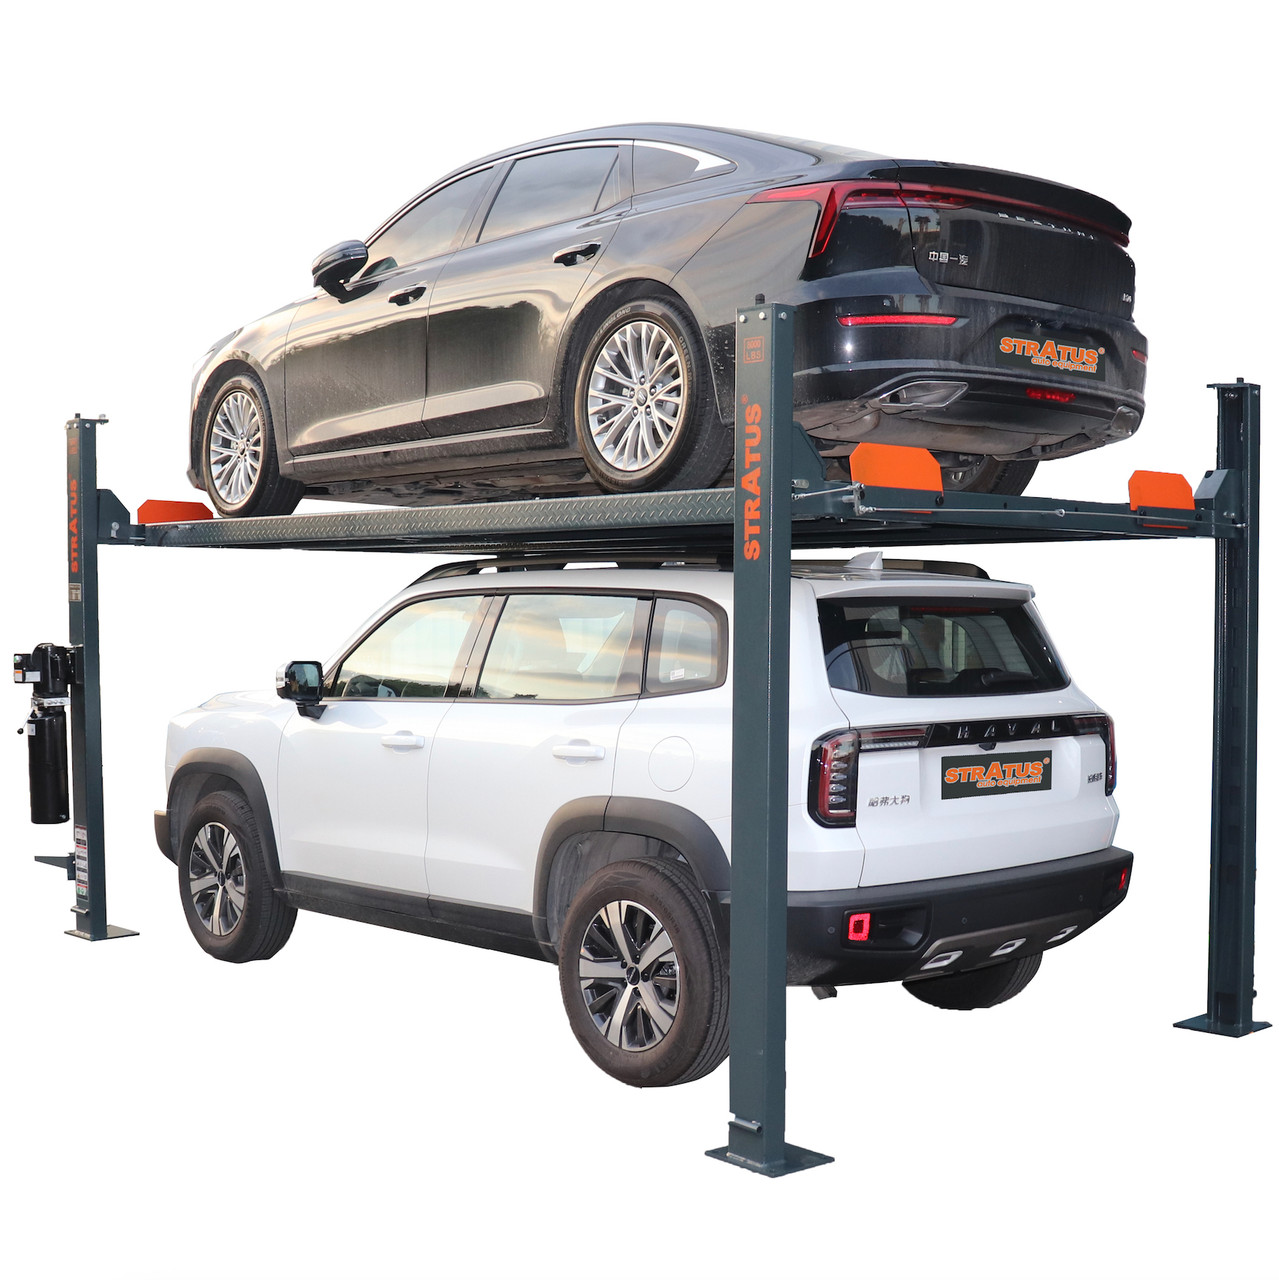 This 8,000 lbs 4 post car lift comes with convenient castors making maneuverability a breeze. With the SAE-P48 model, you get powerful lifting capabilities and a handy solution all wrapped in one garage car lift for storage.